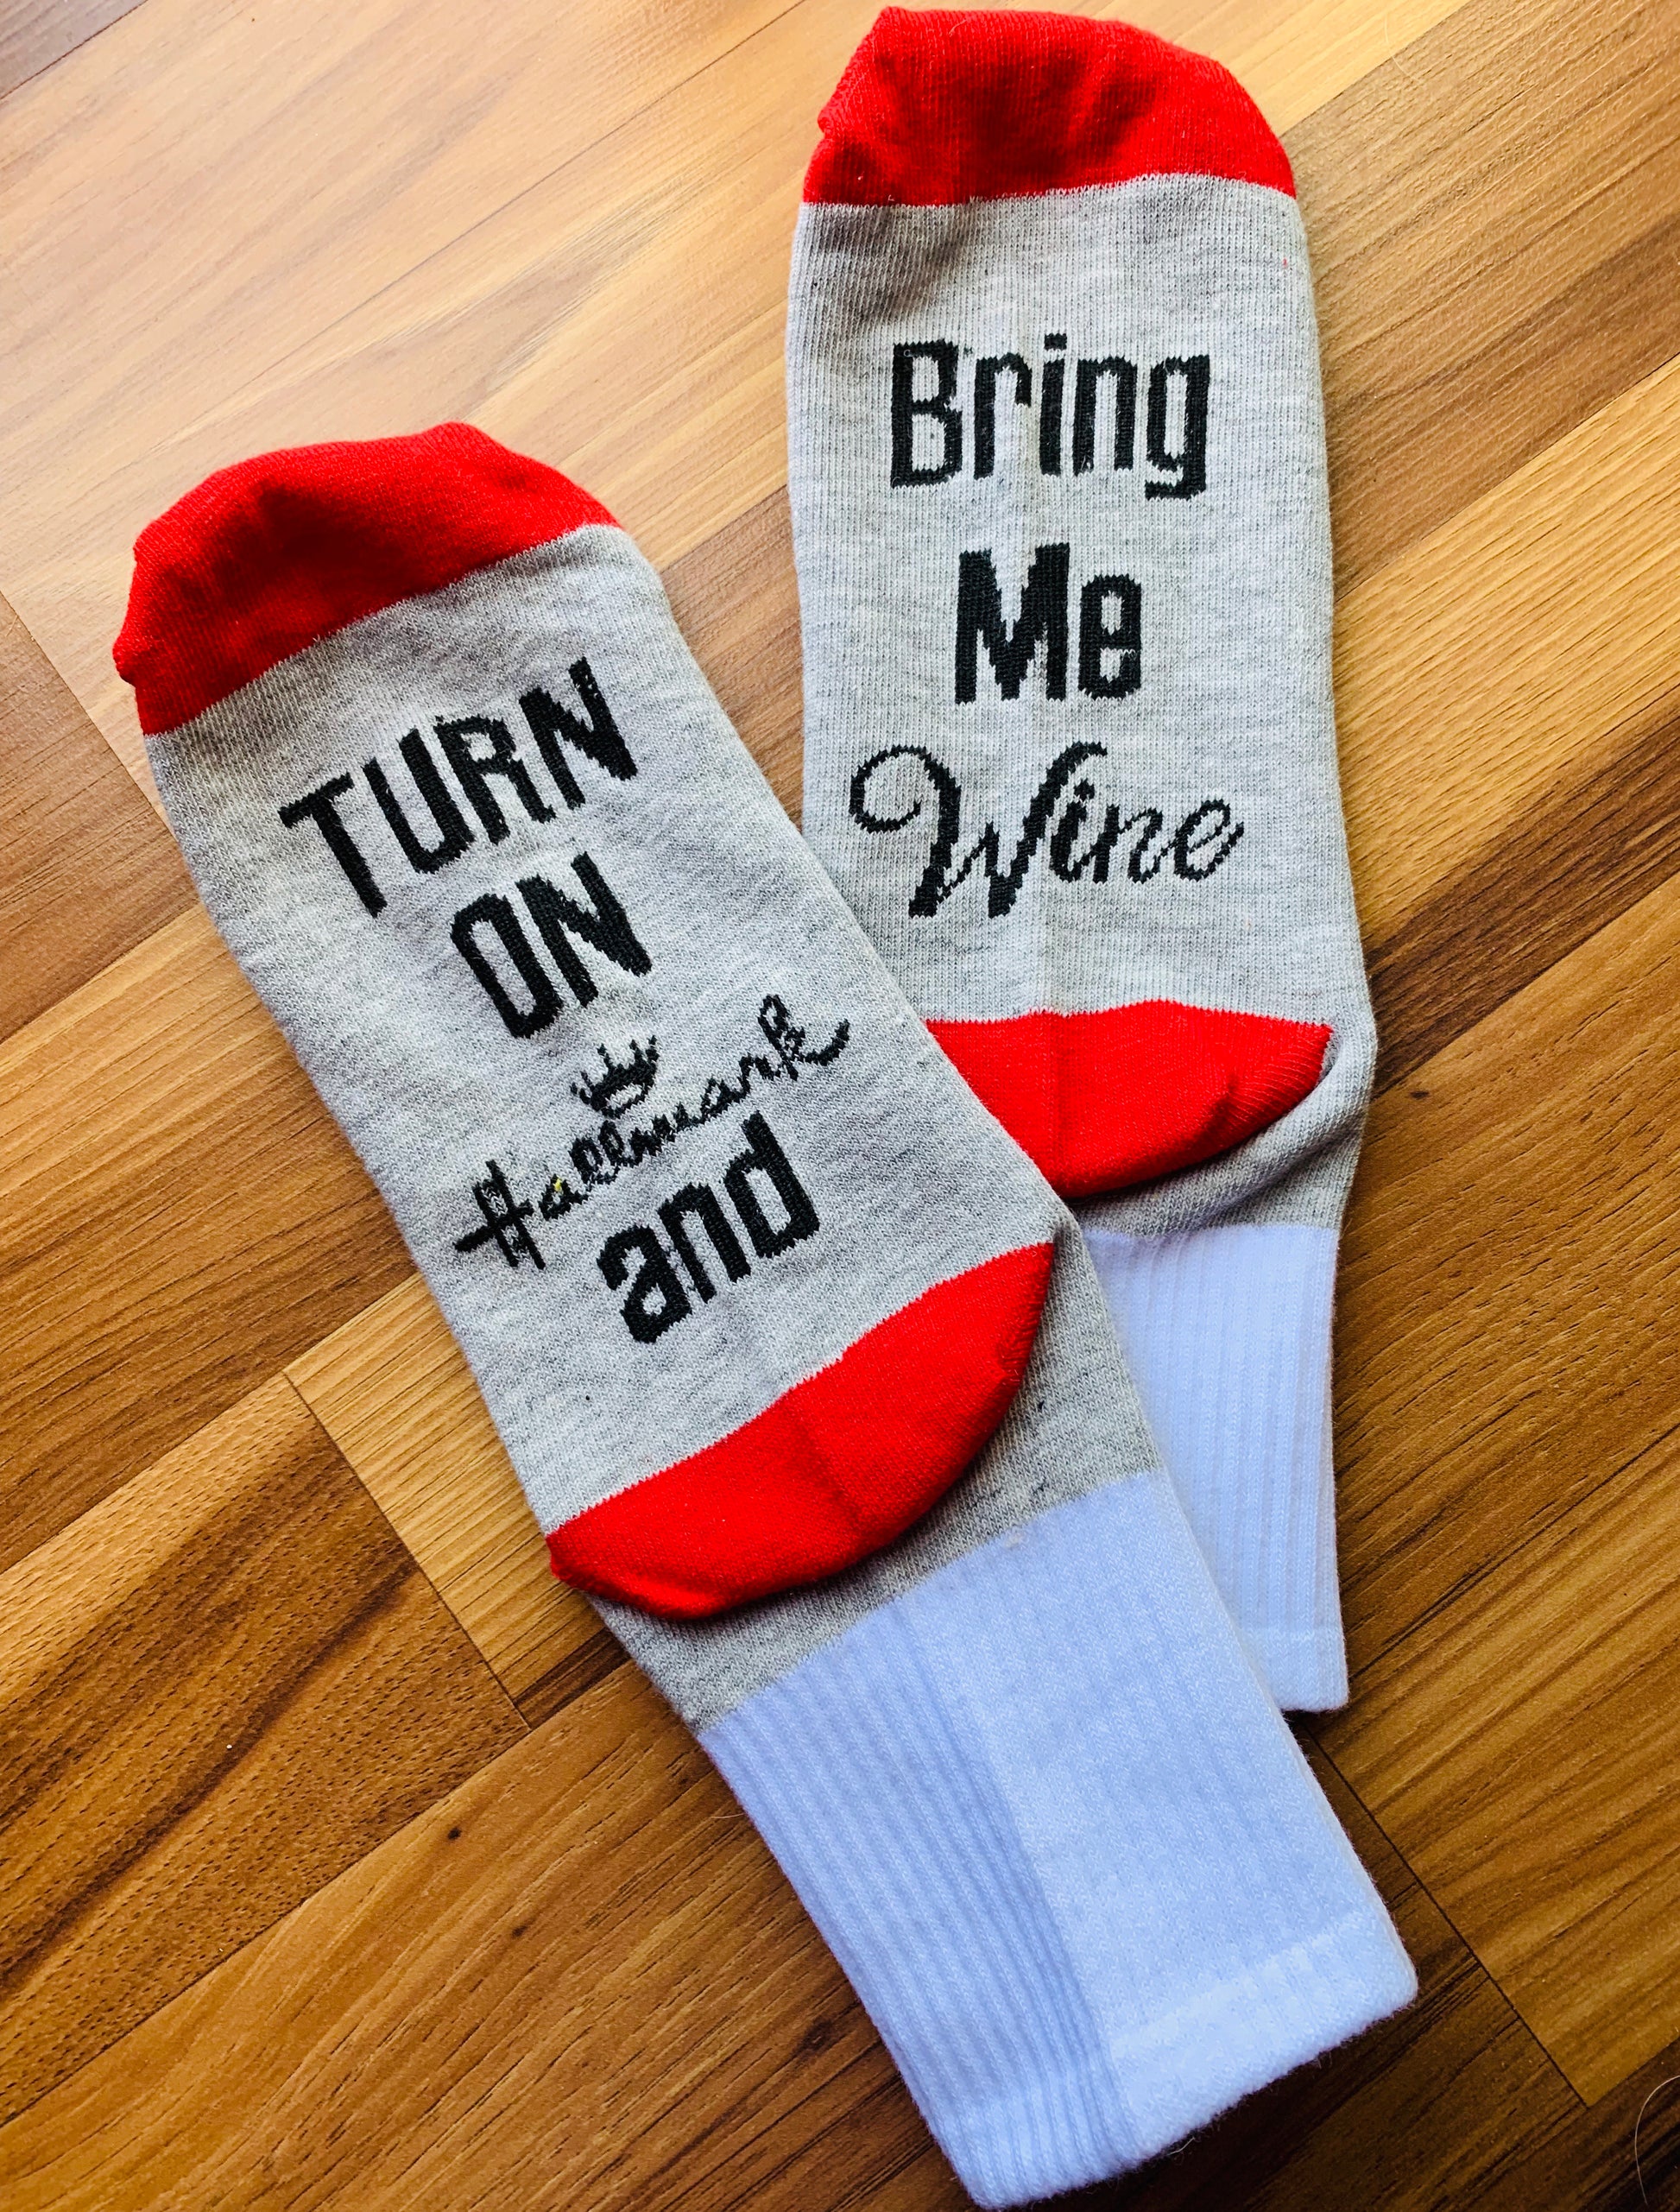 Socks { Turn on Hallmark & bring me w ine } Red and gray with